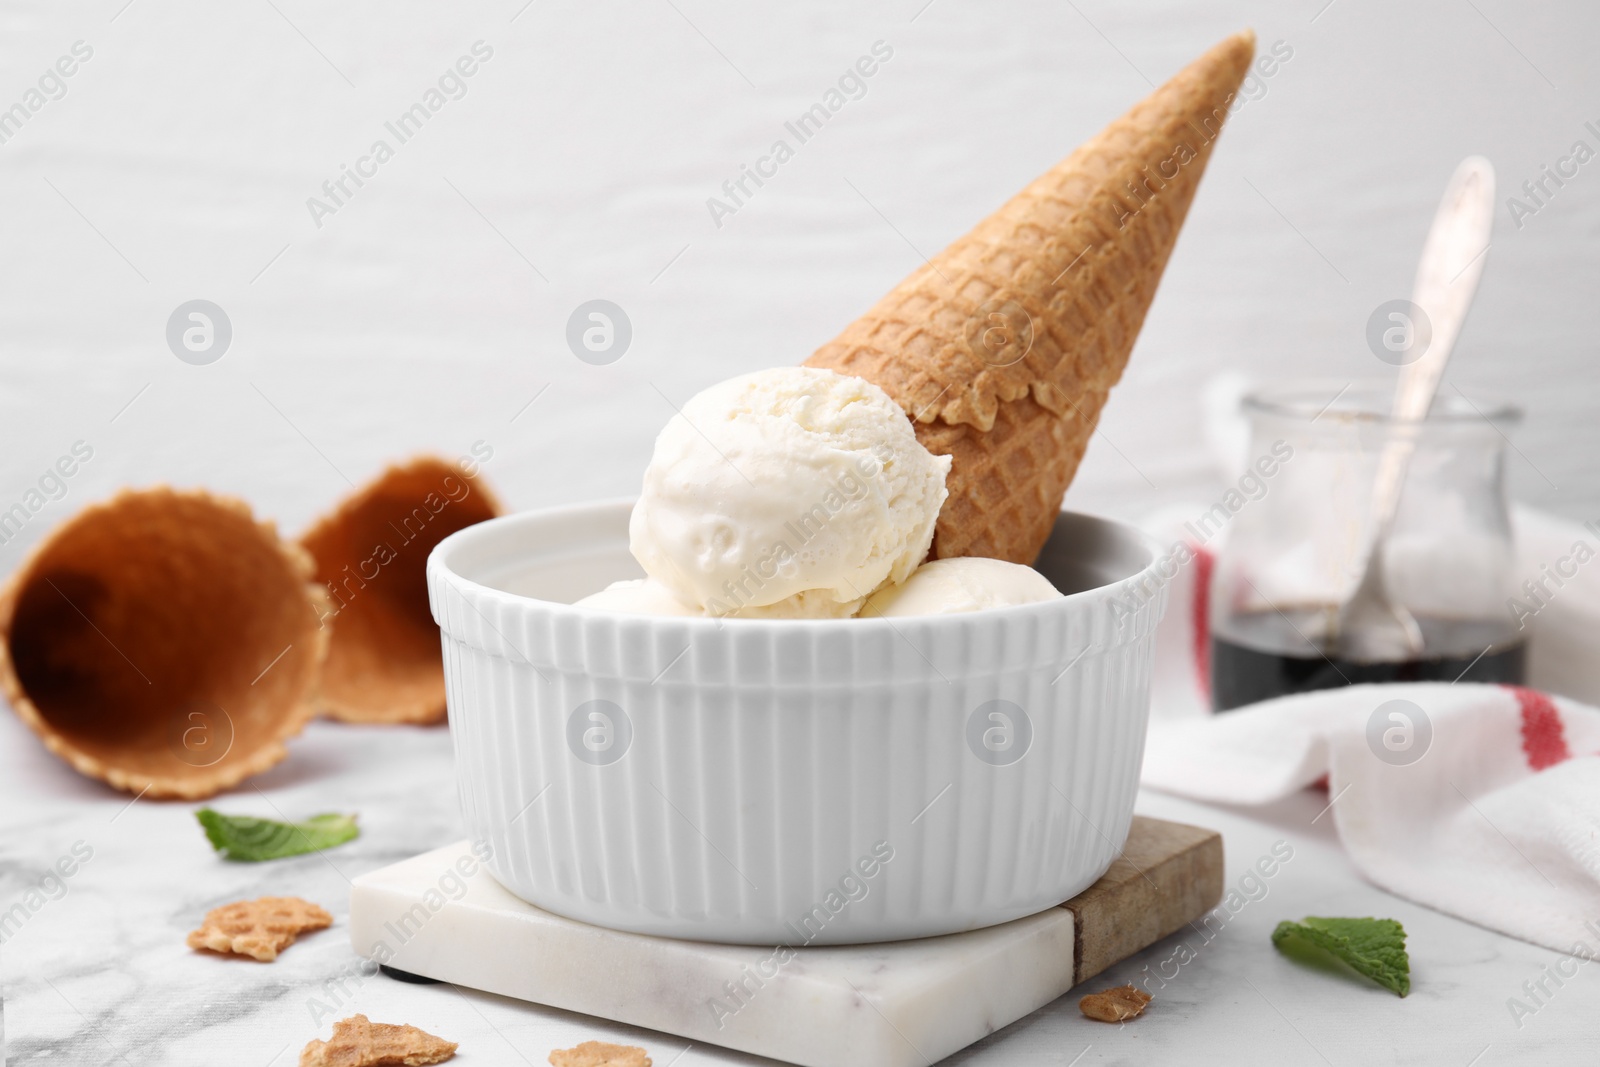 Photo of Scoops of ice cream with caramel sauce and wafer cone on white marble table, closeup